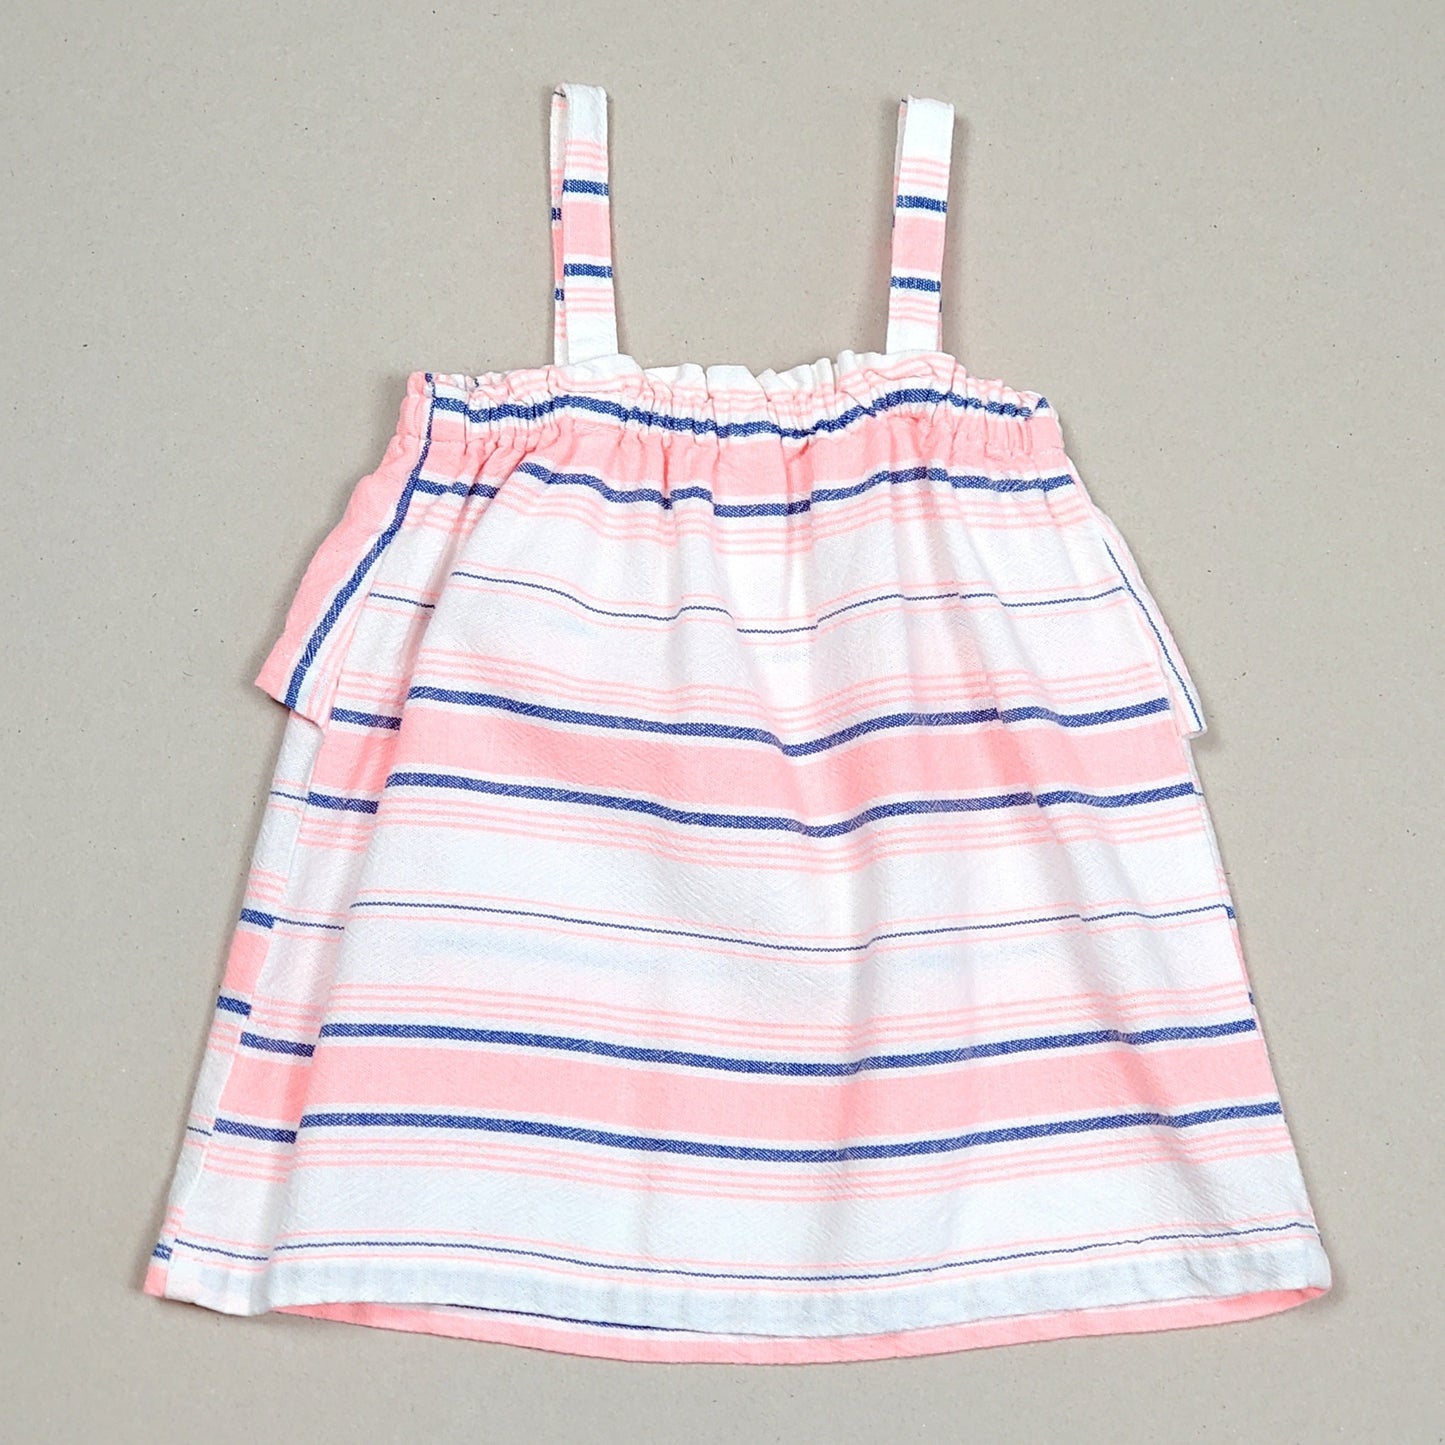 Carters Girls Pink White Striped Tank Top 2T Used View 2